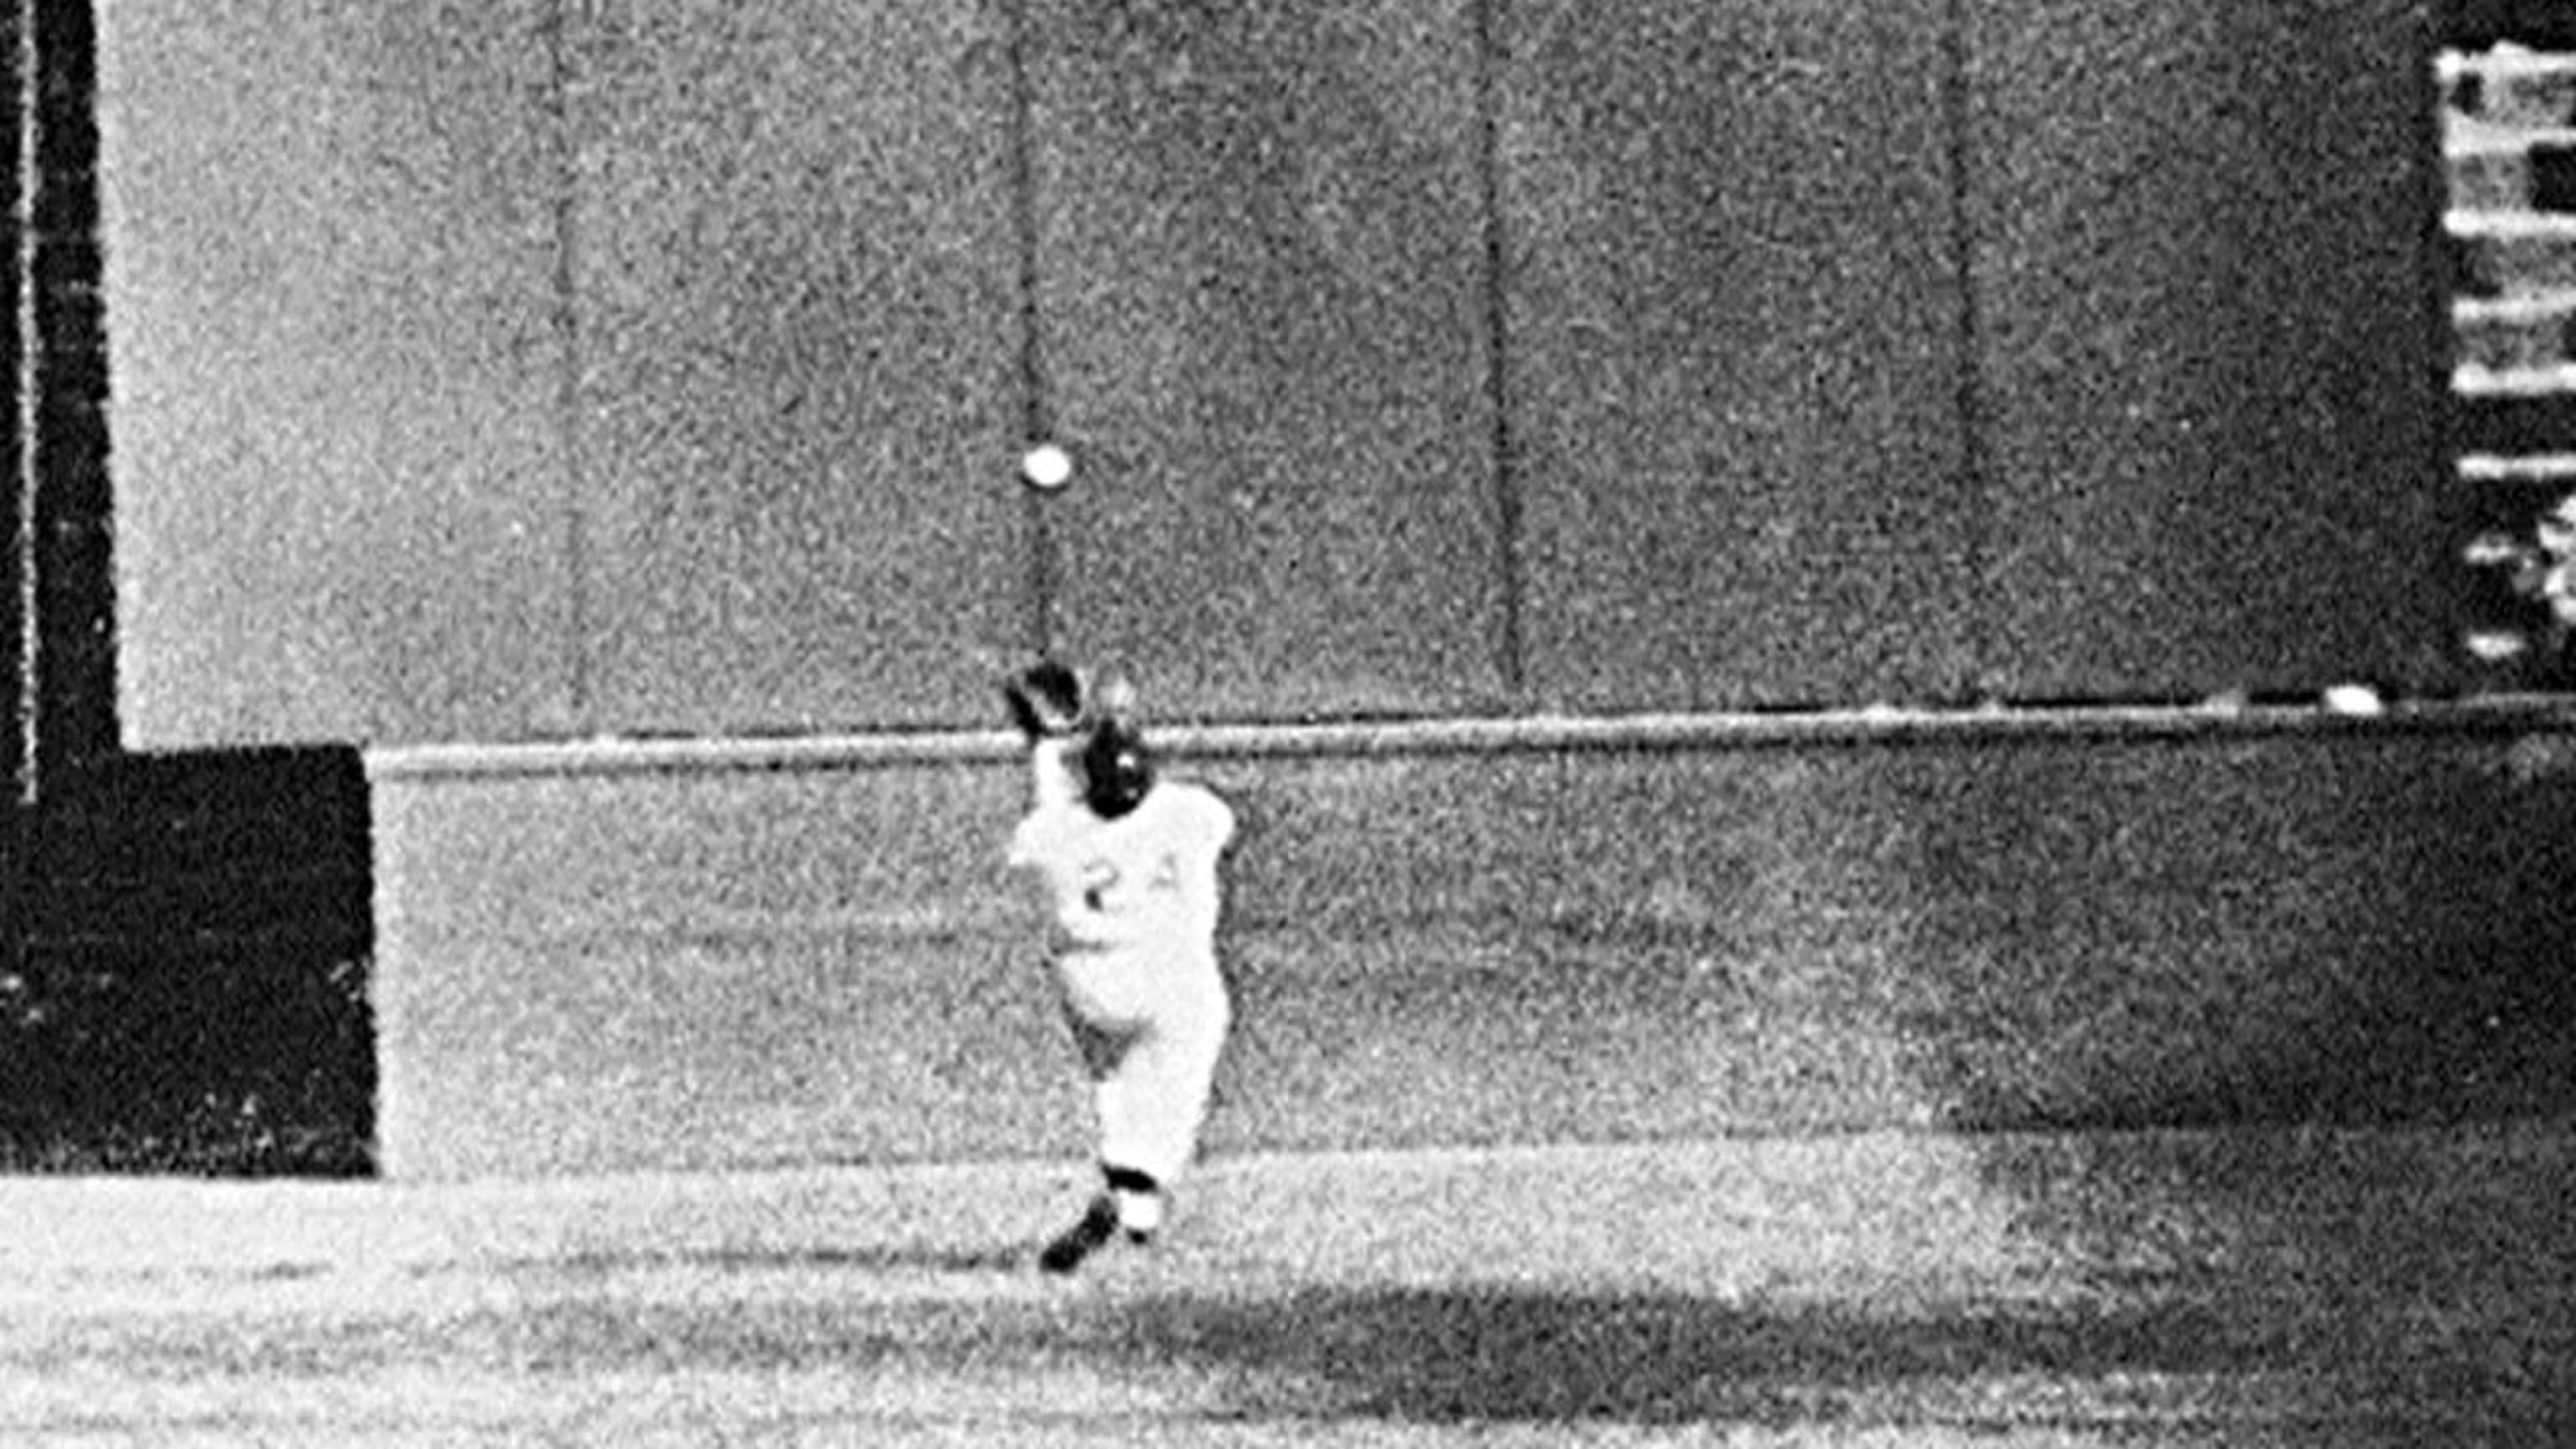 Willie Mays' The Catch in 1954 World Series